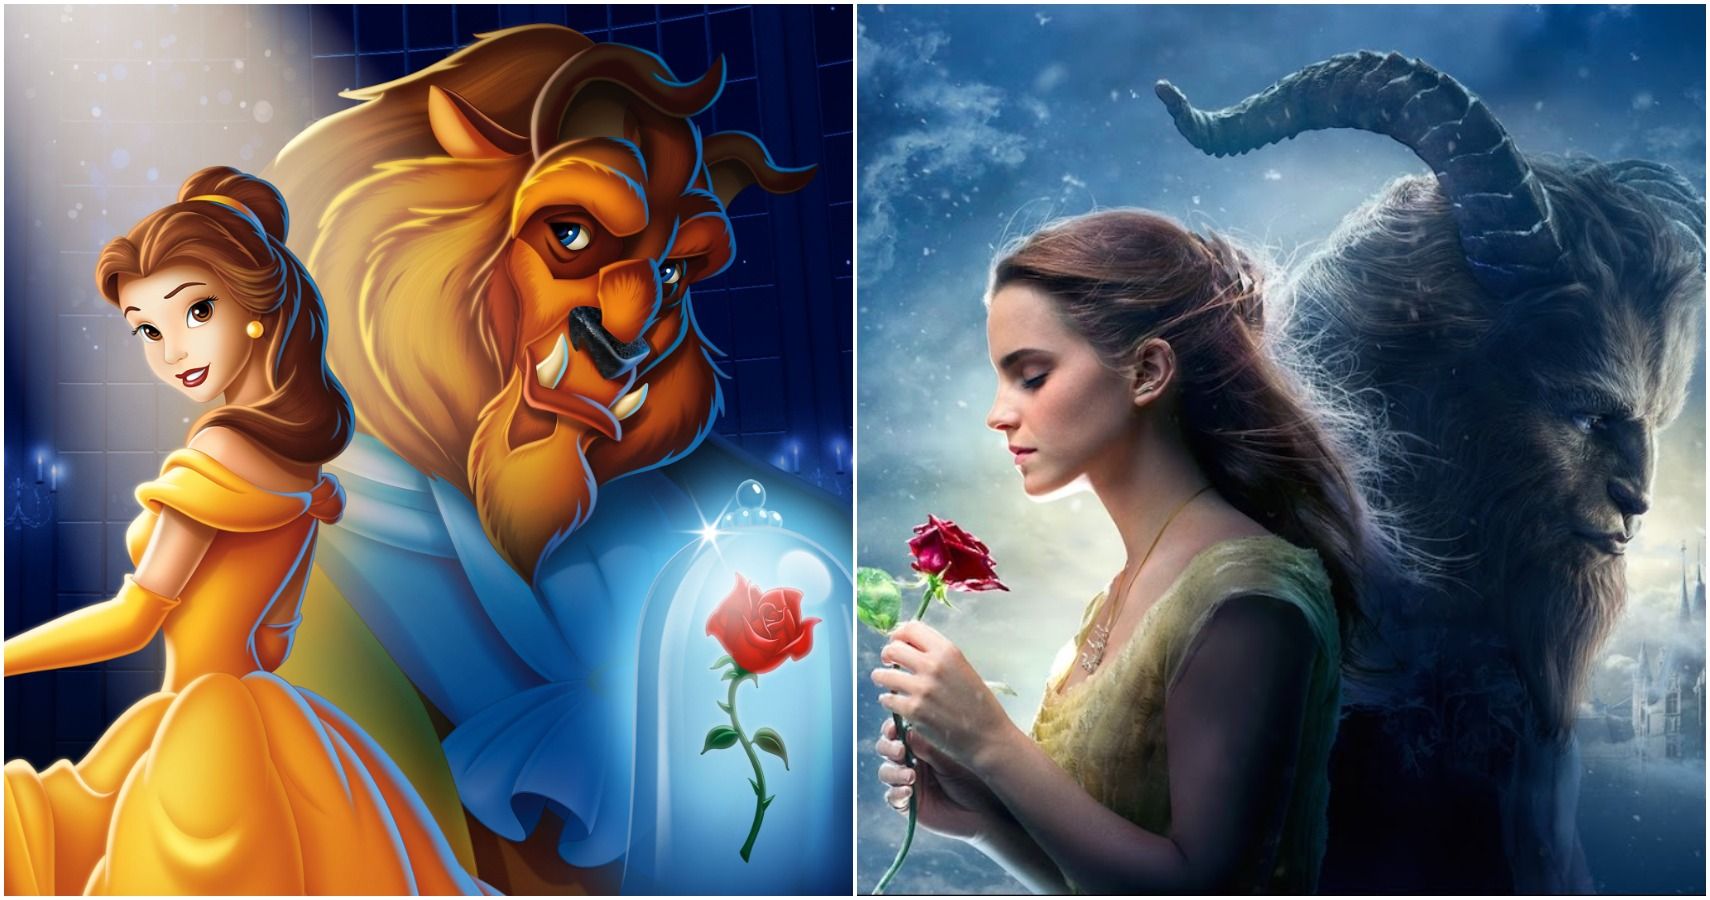 beauty and the beast (2017 film)